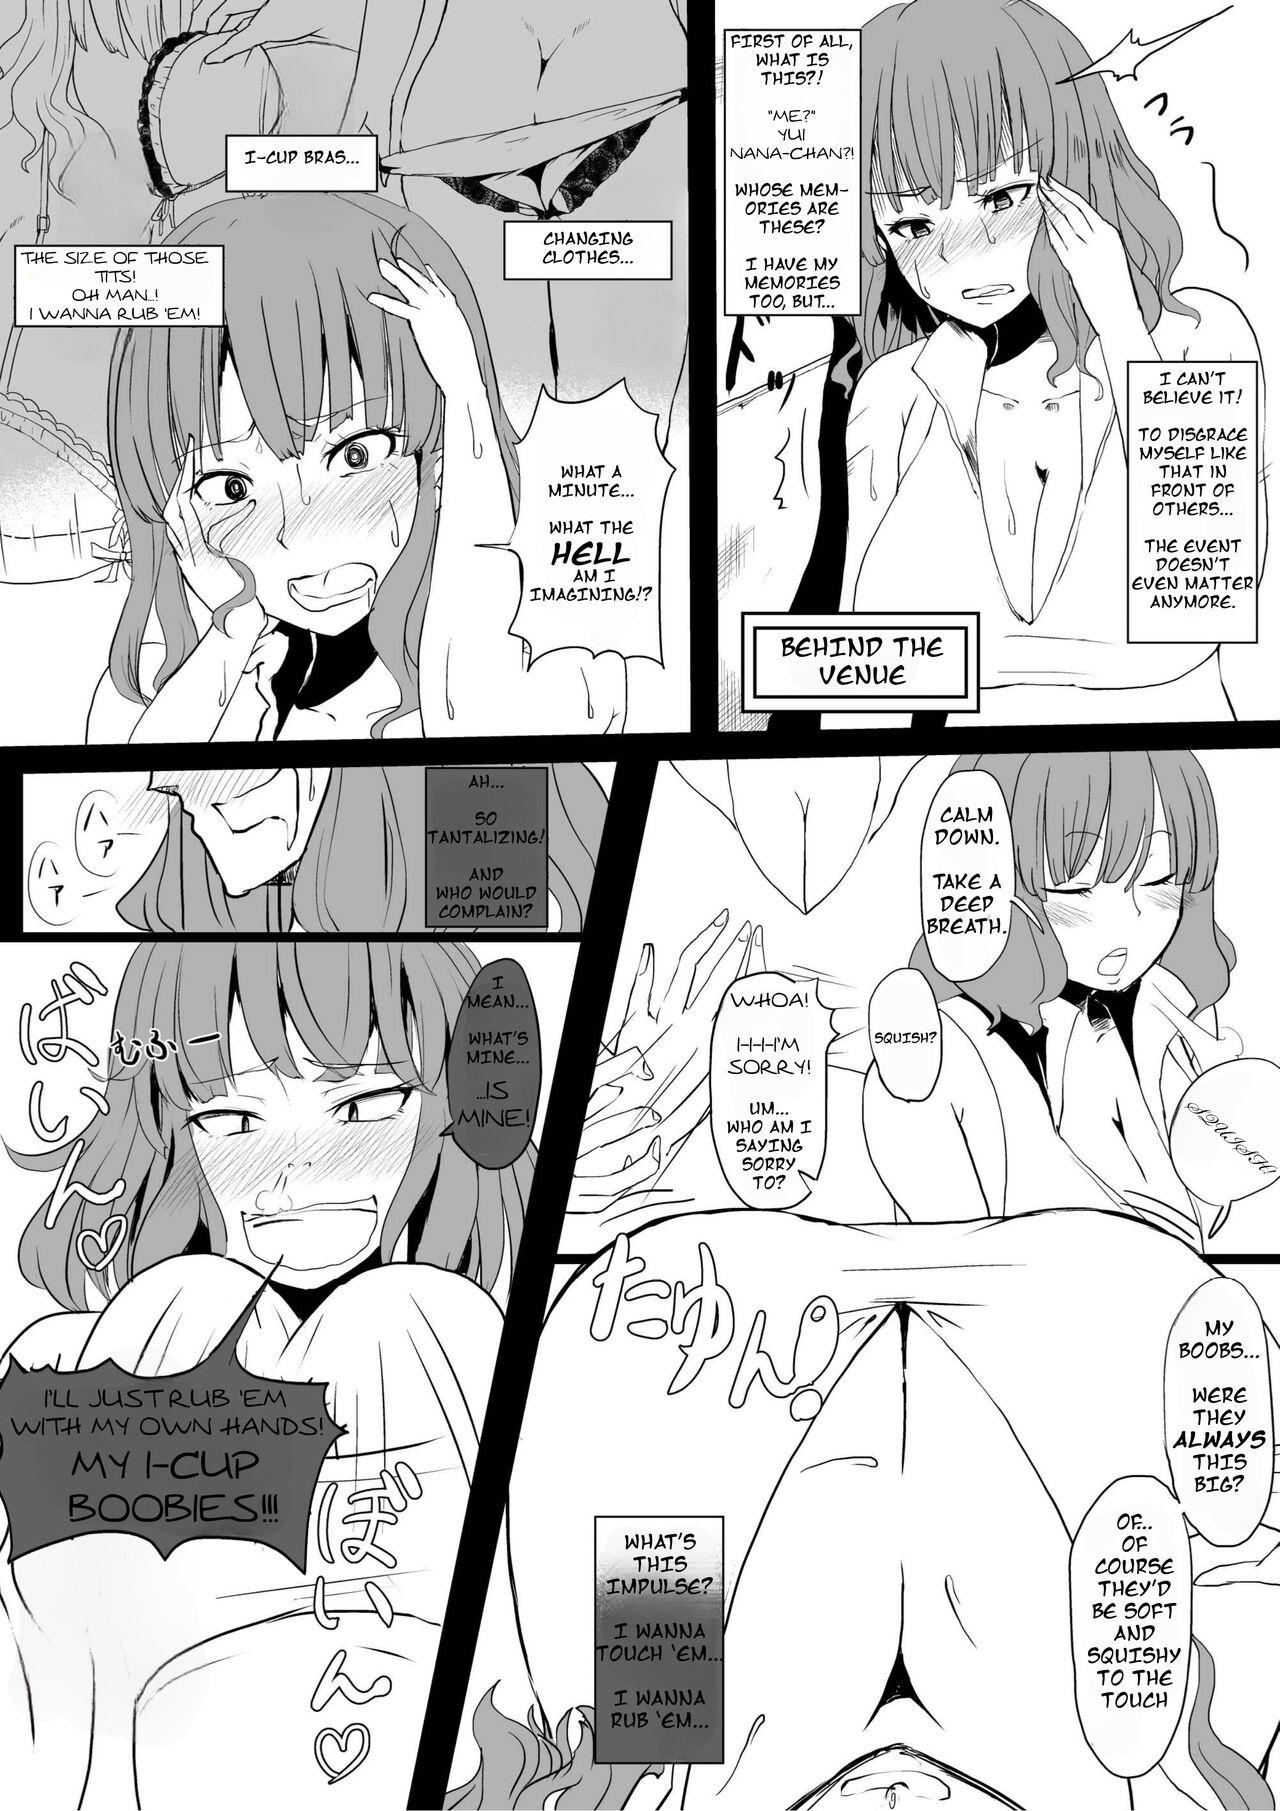 Black Hair Onna no Kokoro o Ossanka Suru Camera | Changing a Woman's Heart to an Old Man's With a Camera - Original For - Page 10